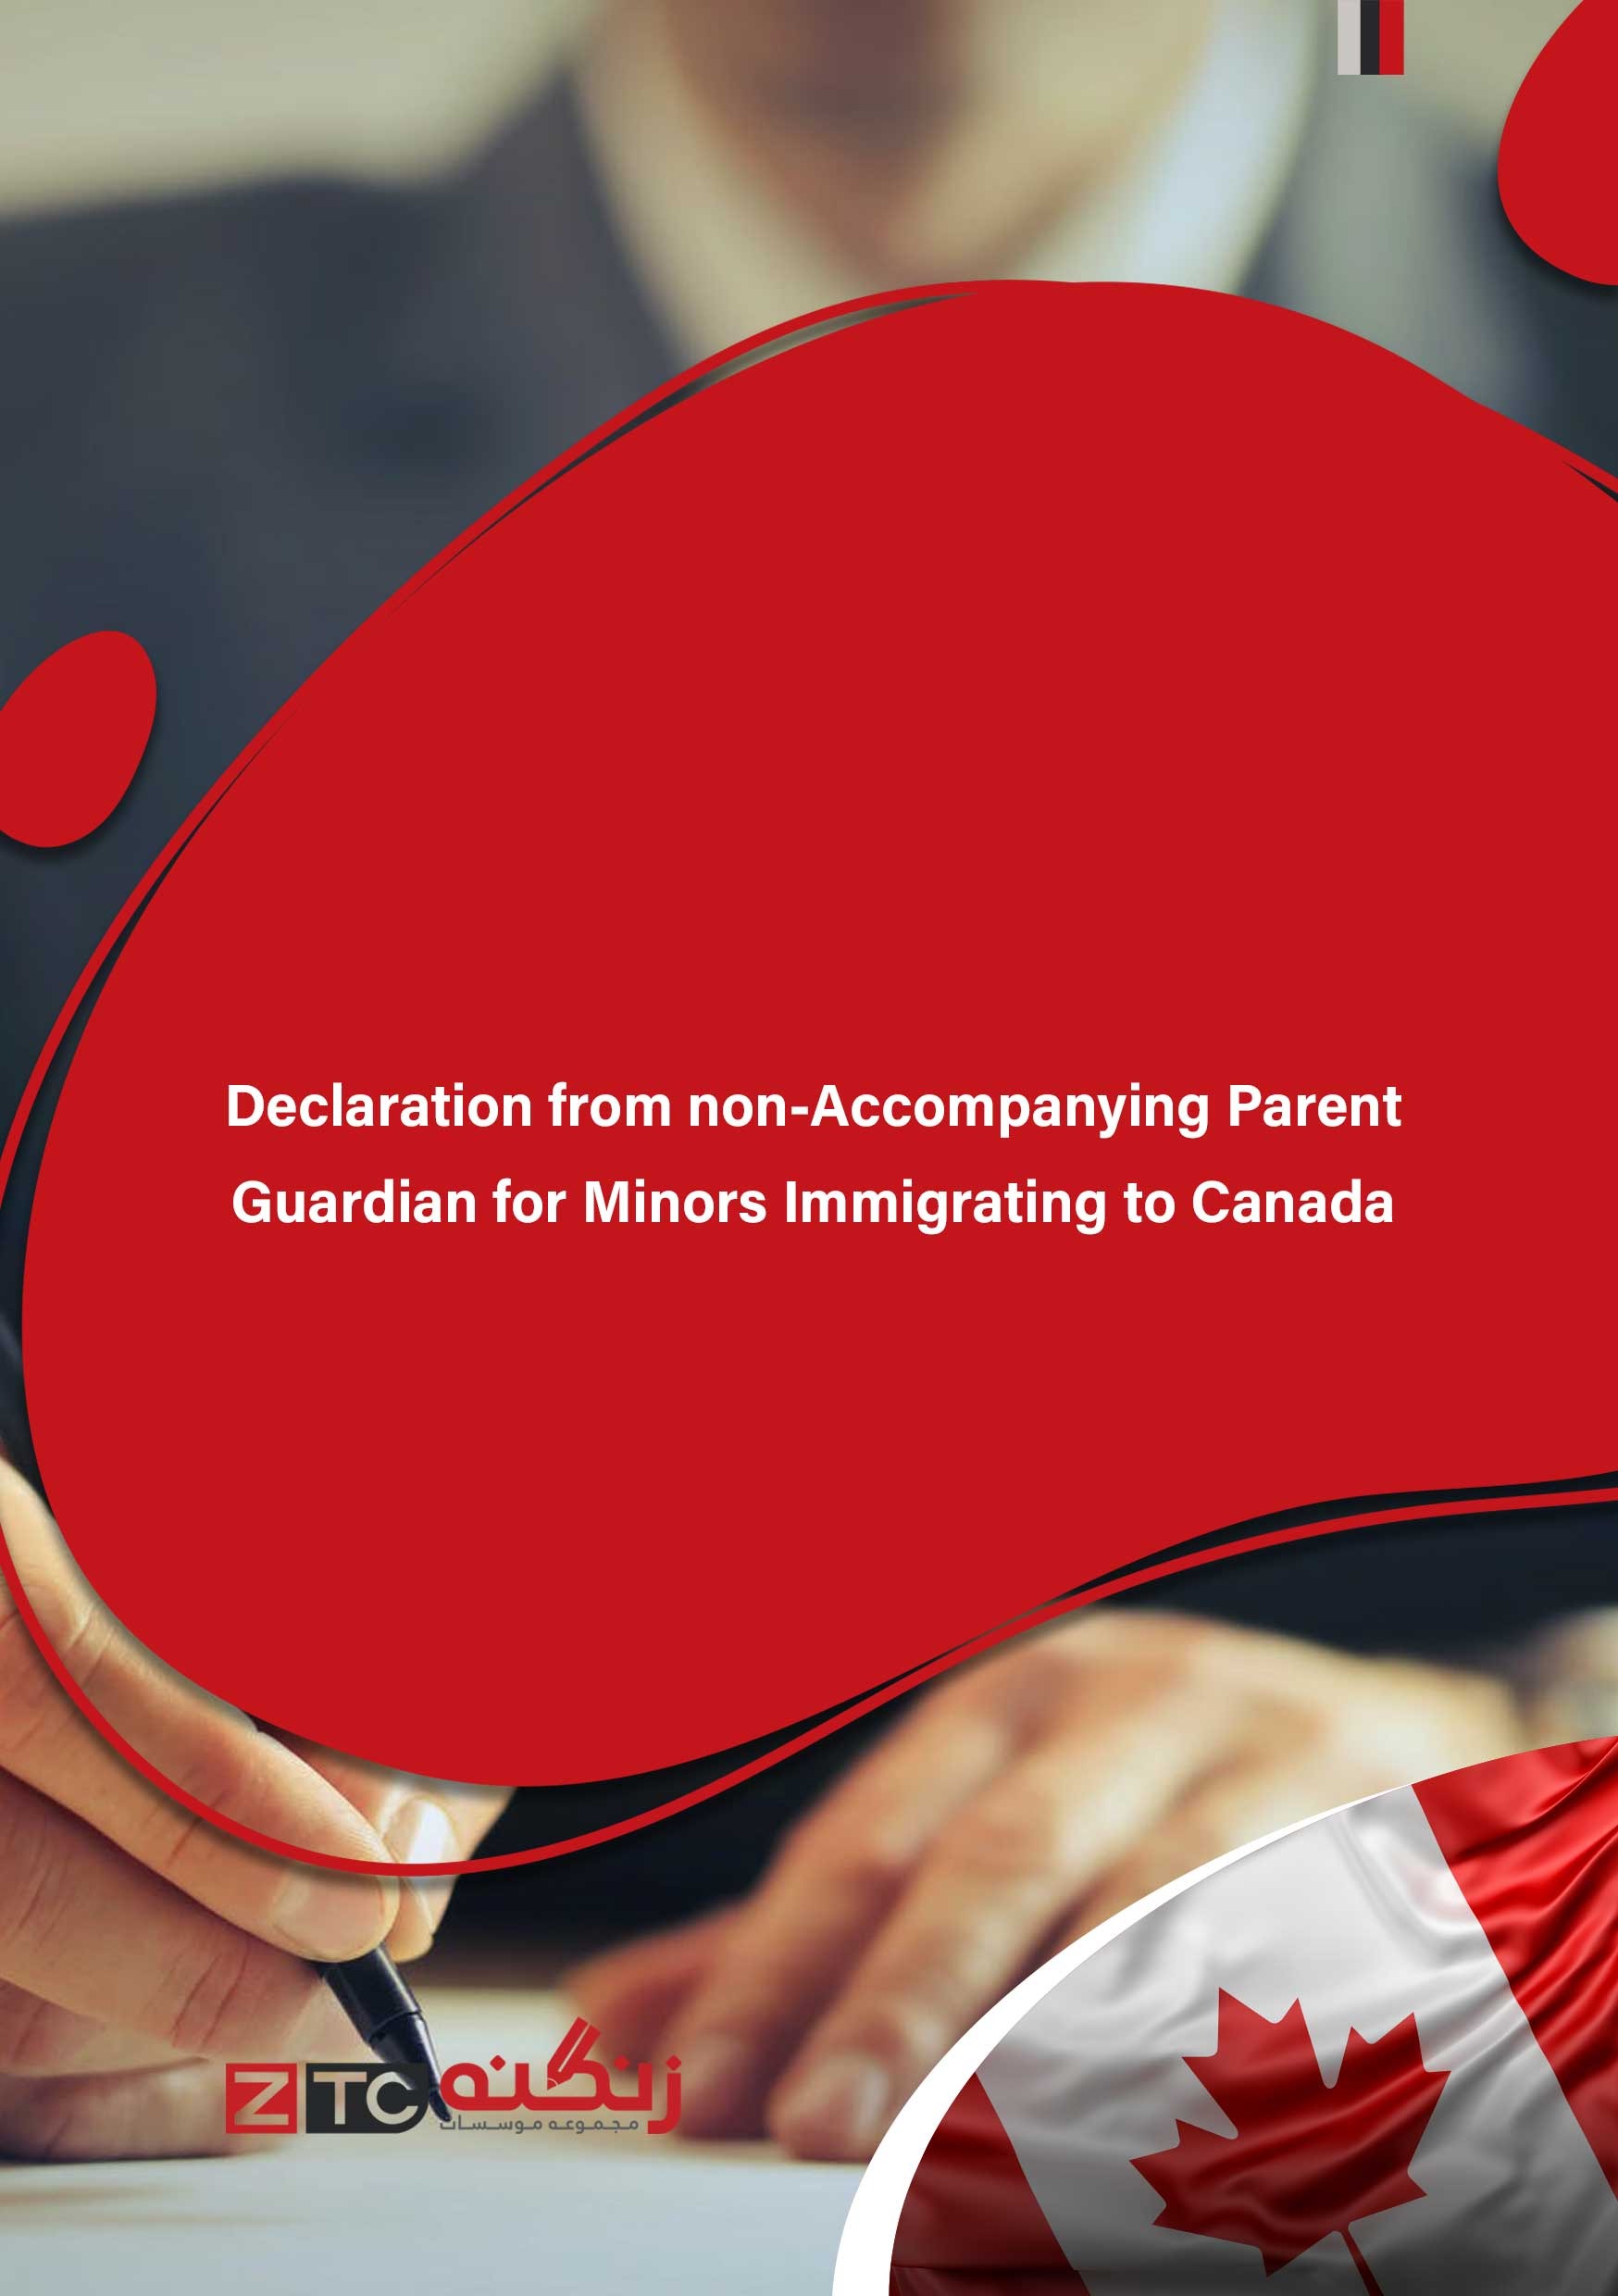 Declaration from non-Accompanying Parent - Guardian for Minors Immigrating to Canada